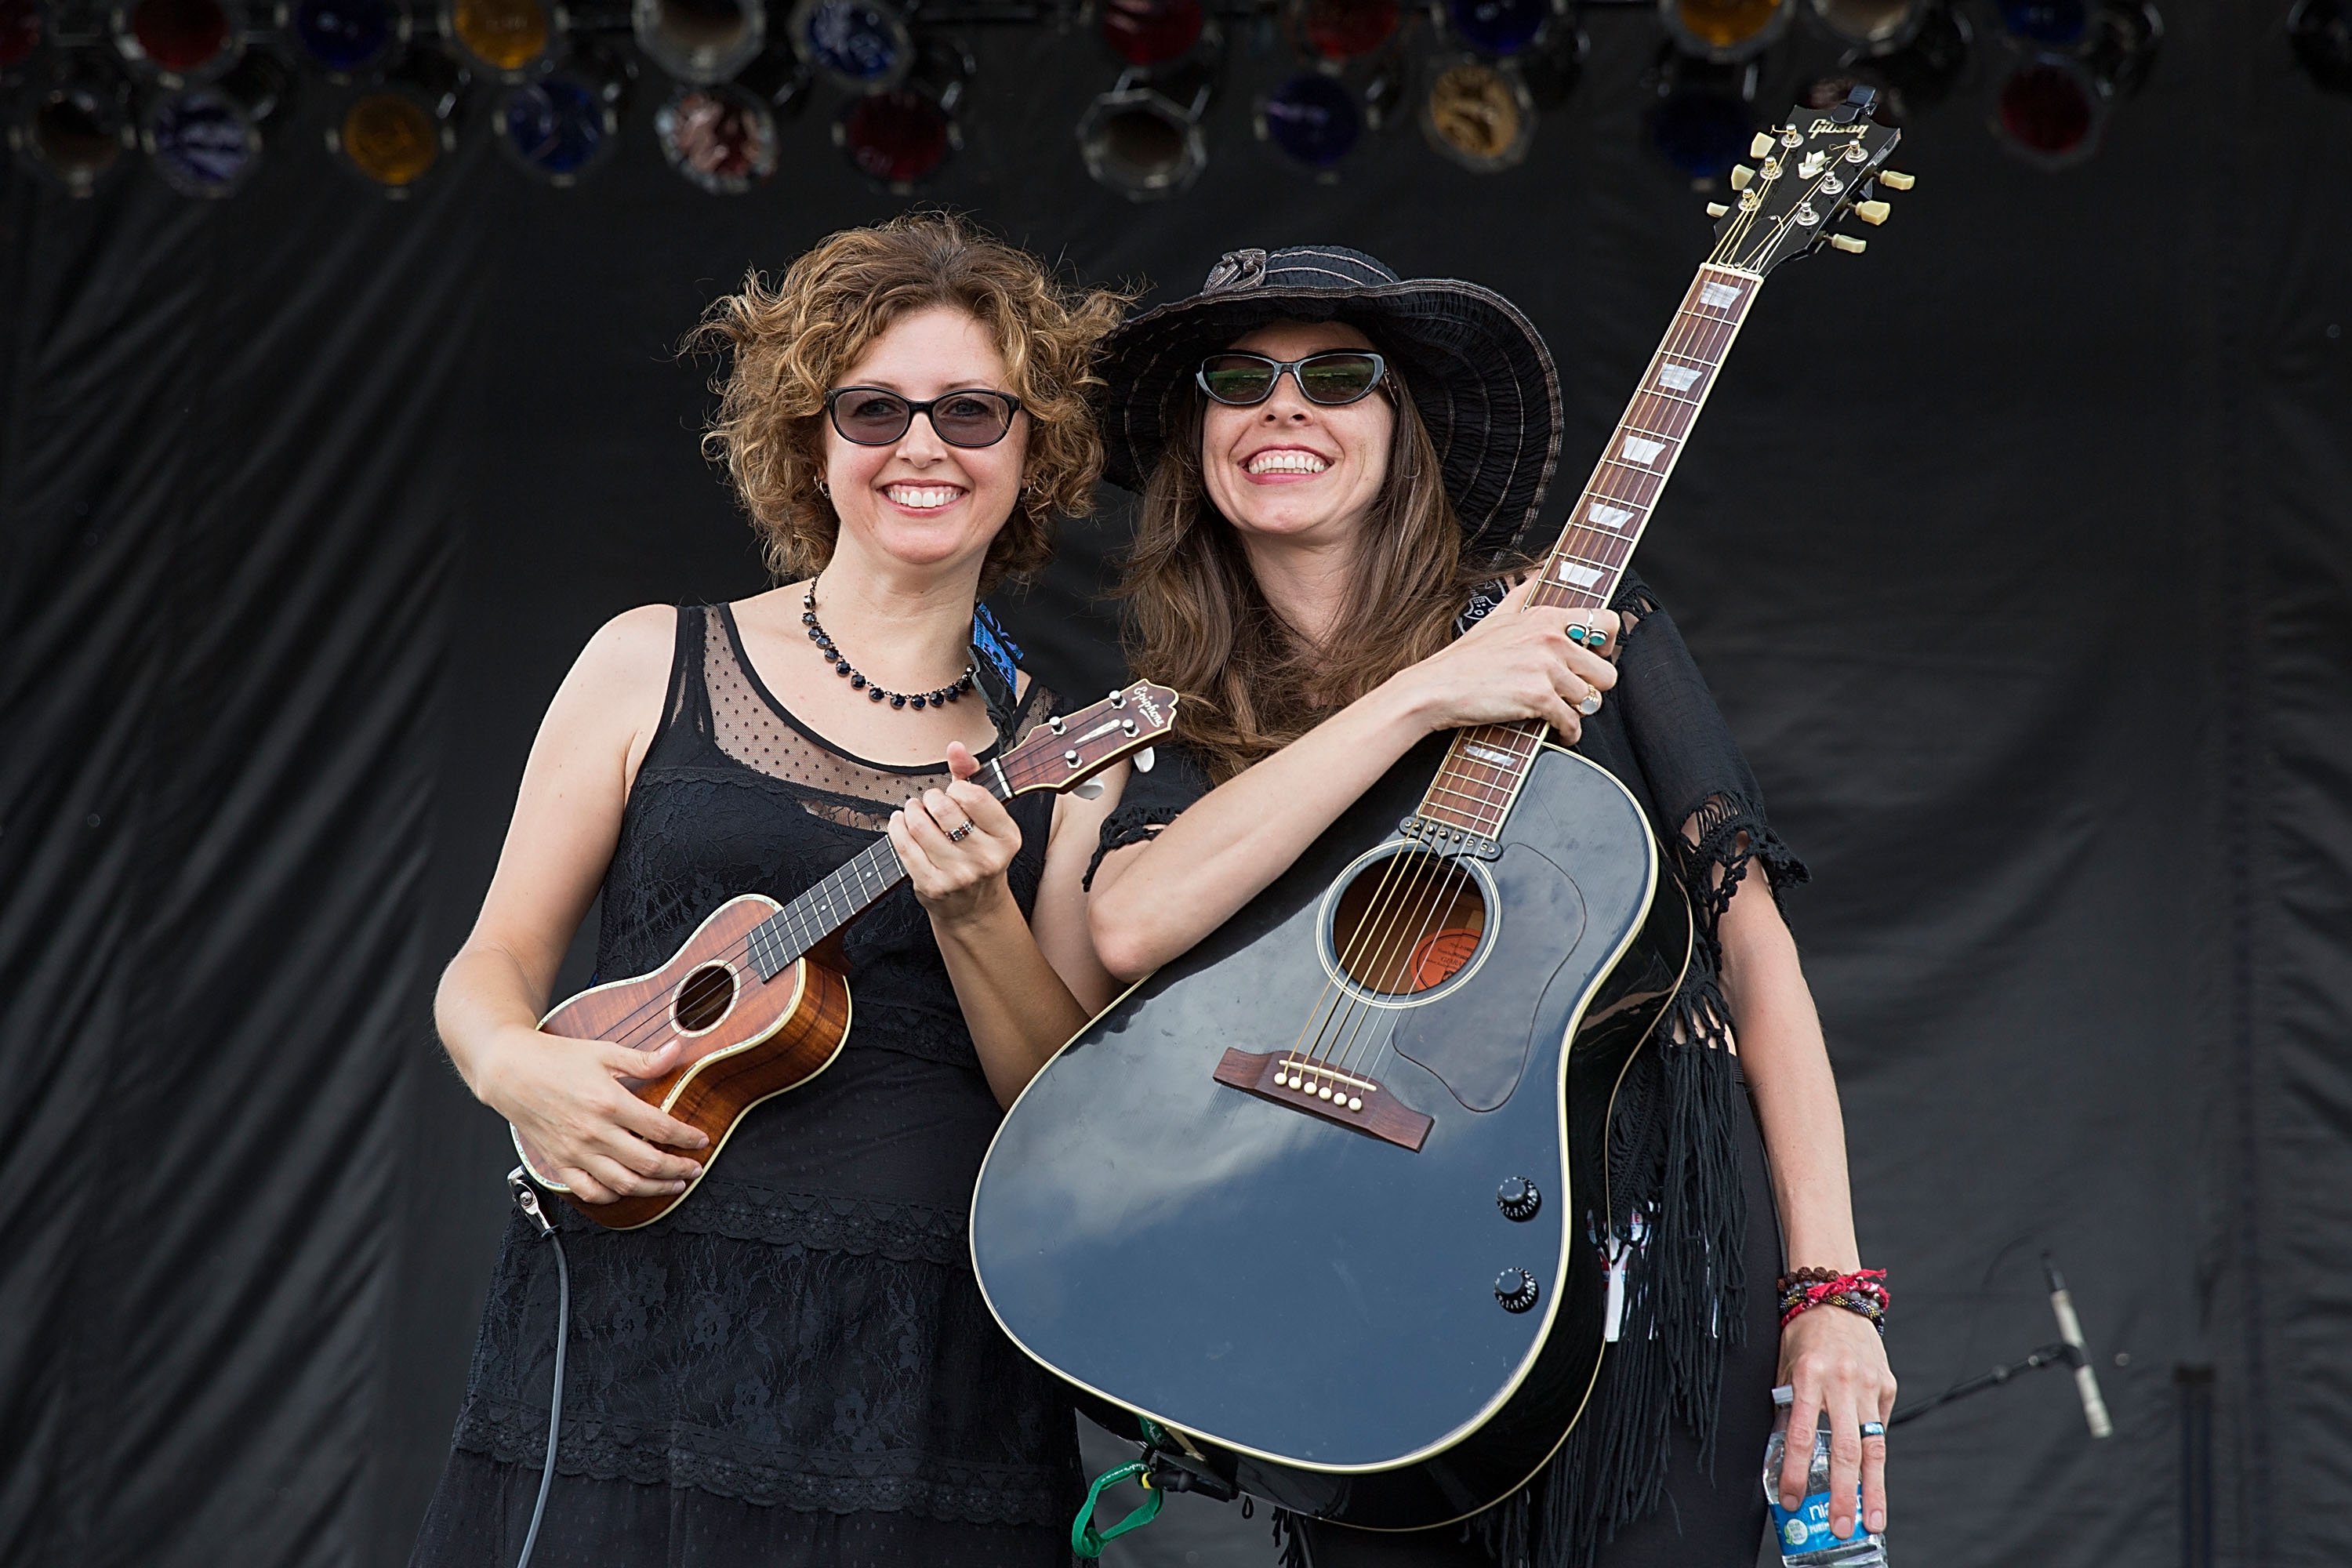  Cathy Guthrie and Amy Nelson during Willie Nelsons' 4th of July Picnic on July 4, 2015, in Texas | Source: Getty Images